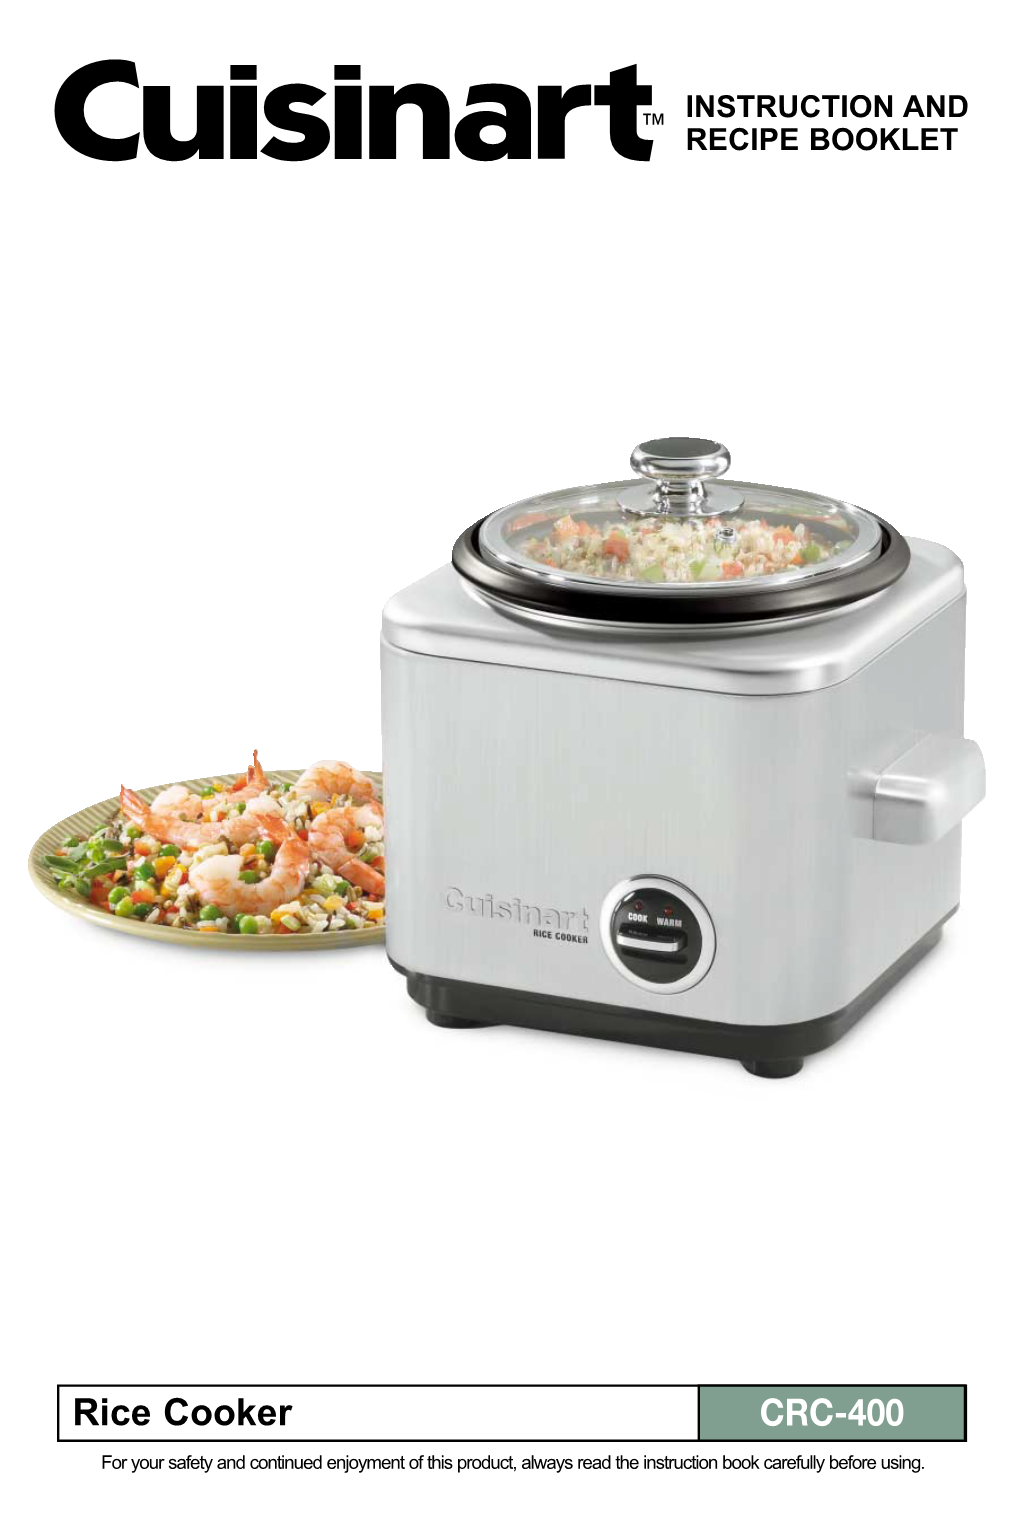 Rice Cooker CRC-400 U IB-4932IB-4932 for Your Safety and Continued Enjoyment of This Product, Always Read the Instruction Book Carefully Before Using